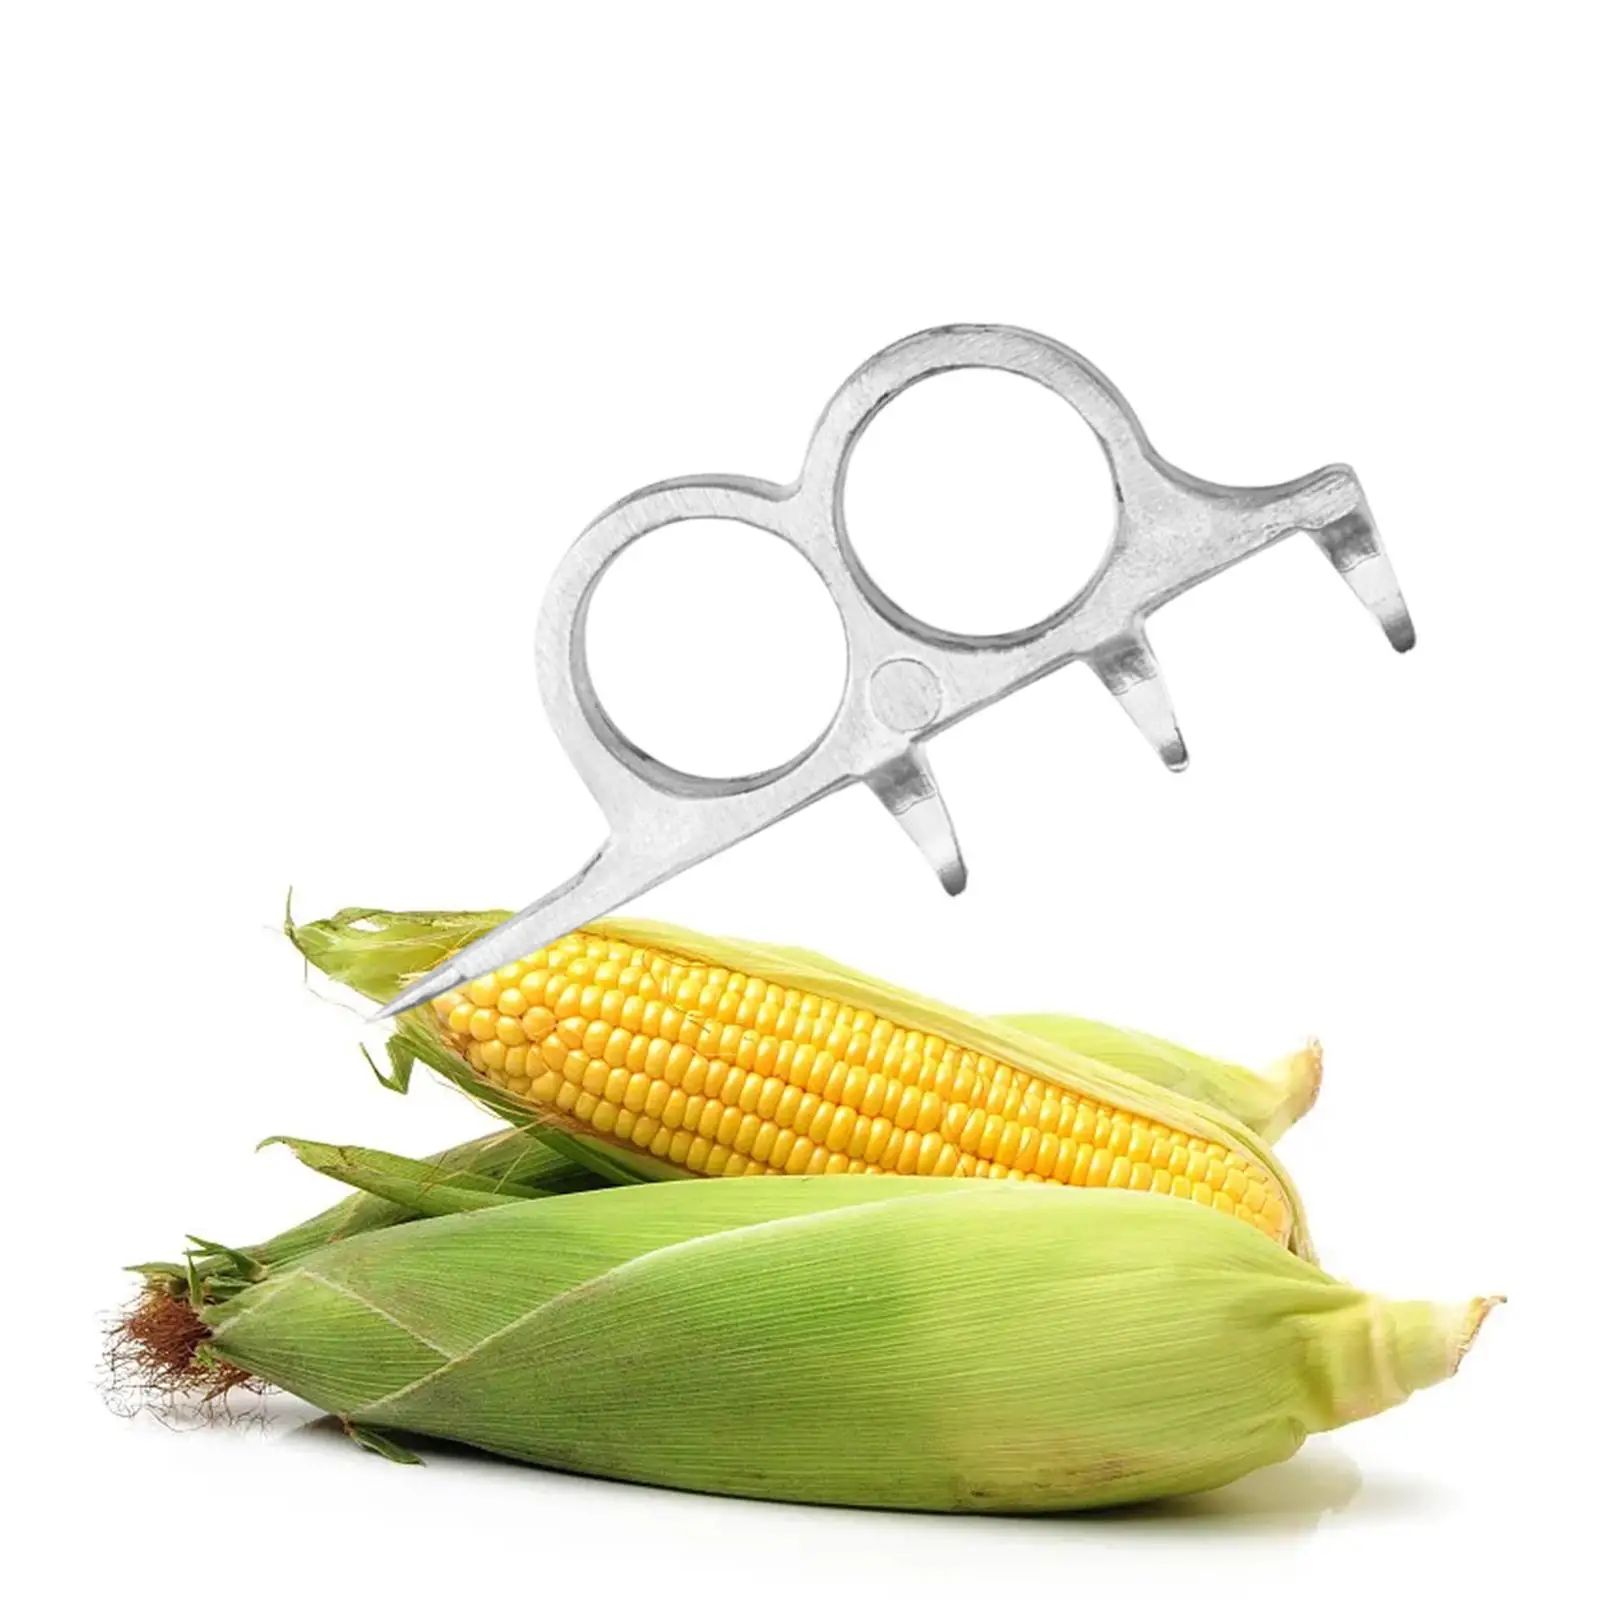 Aluminum Alloy Coin Remover Quick Peeling Utensils Corn Peeling Tool for Groceries Agricultural Kitchen Restaurant